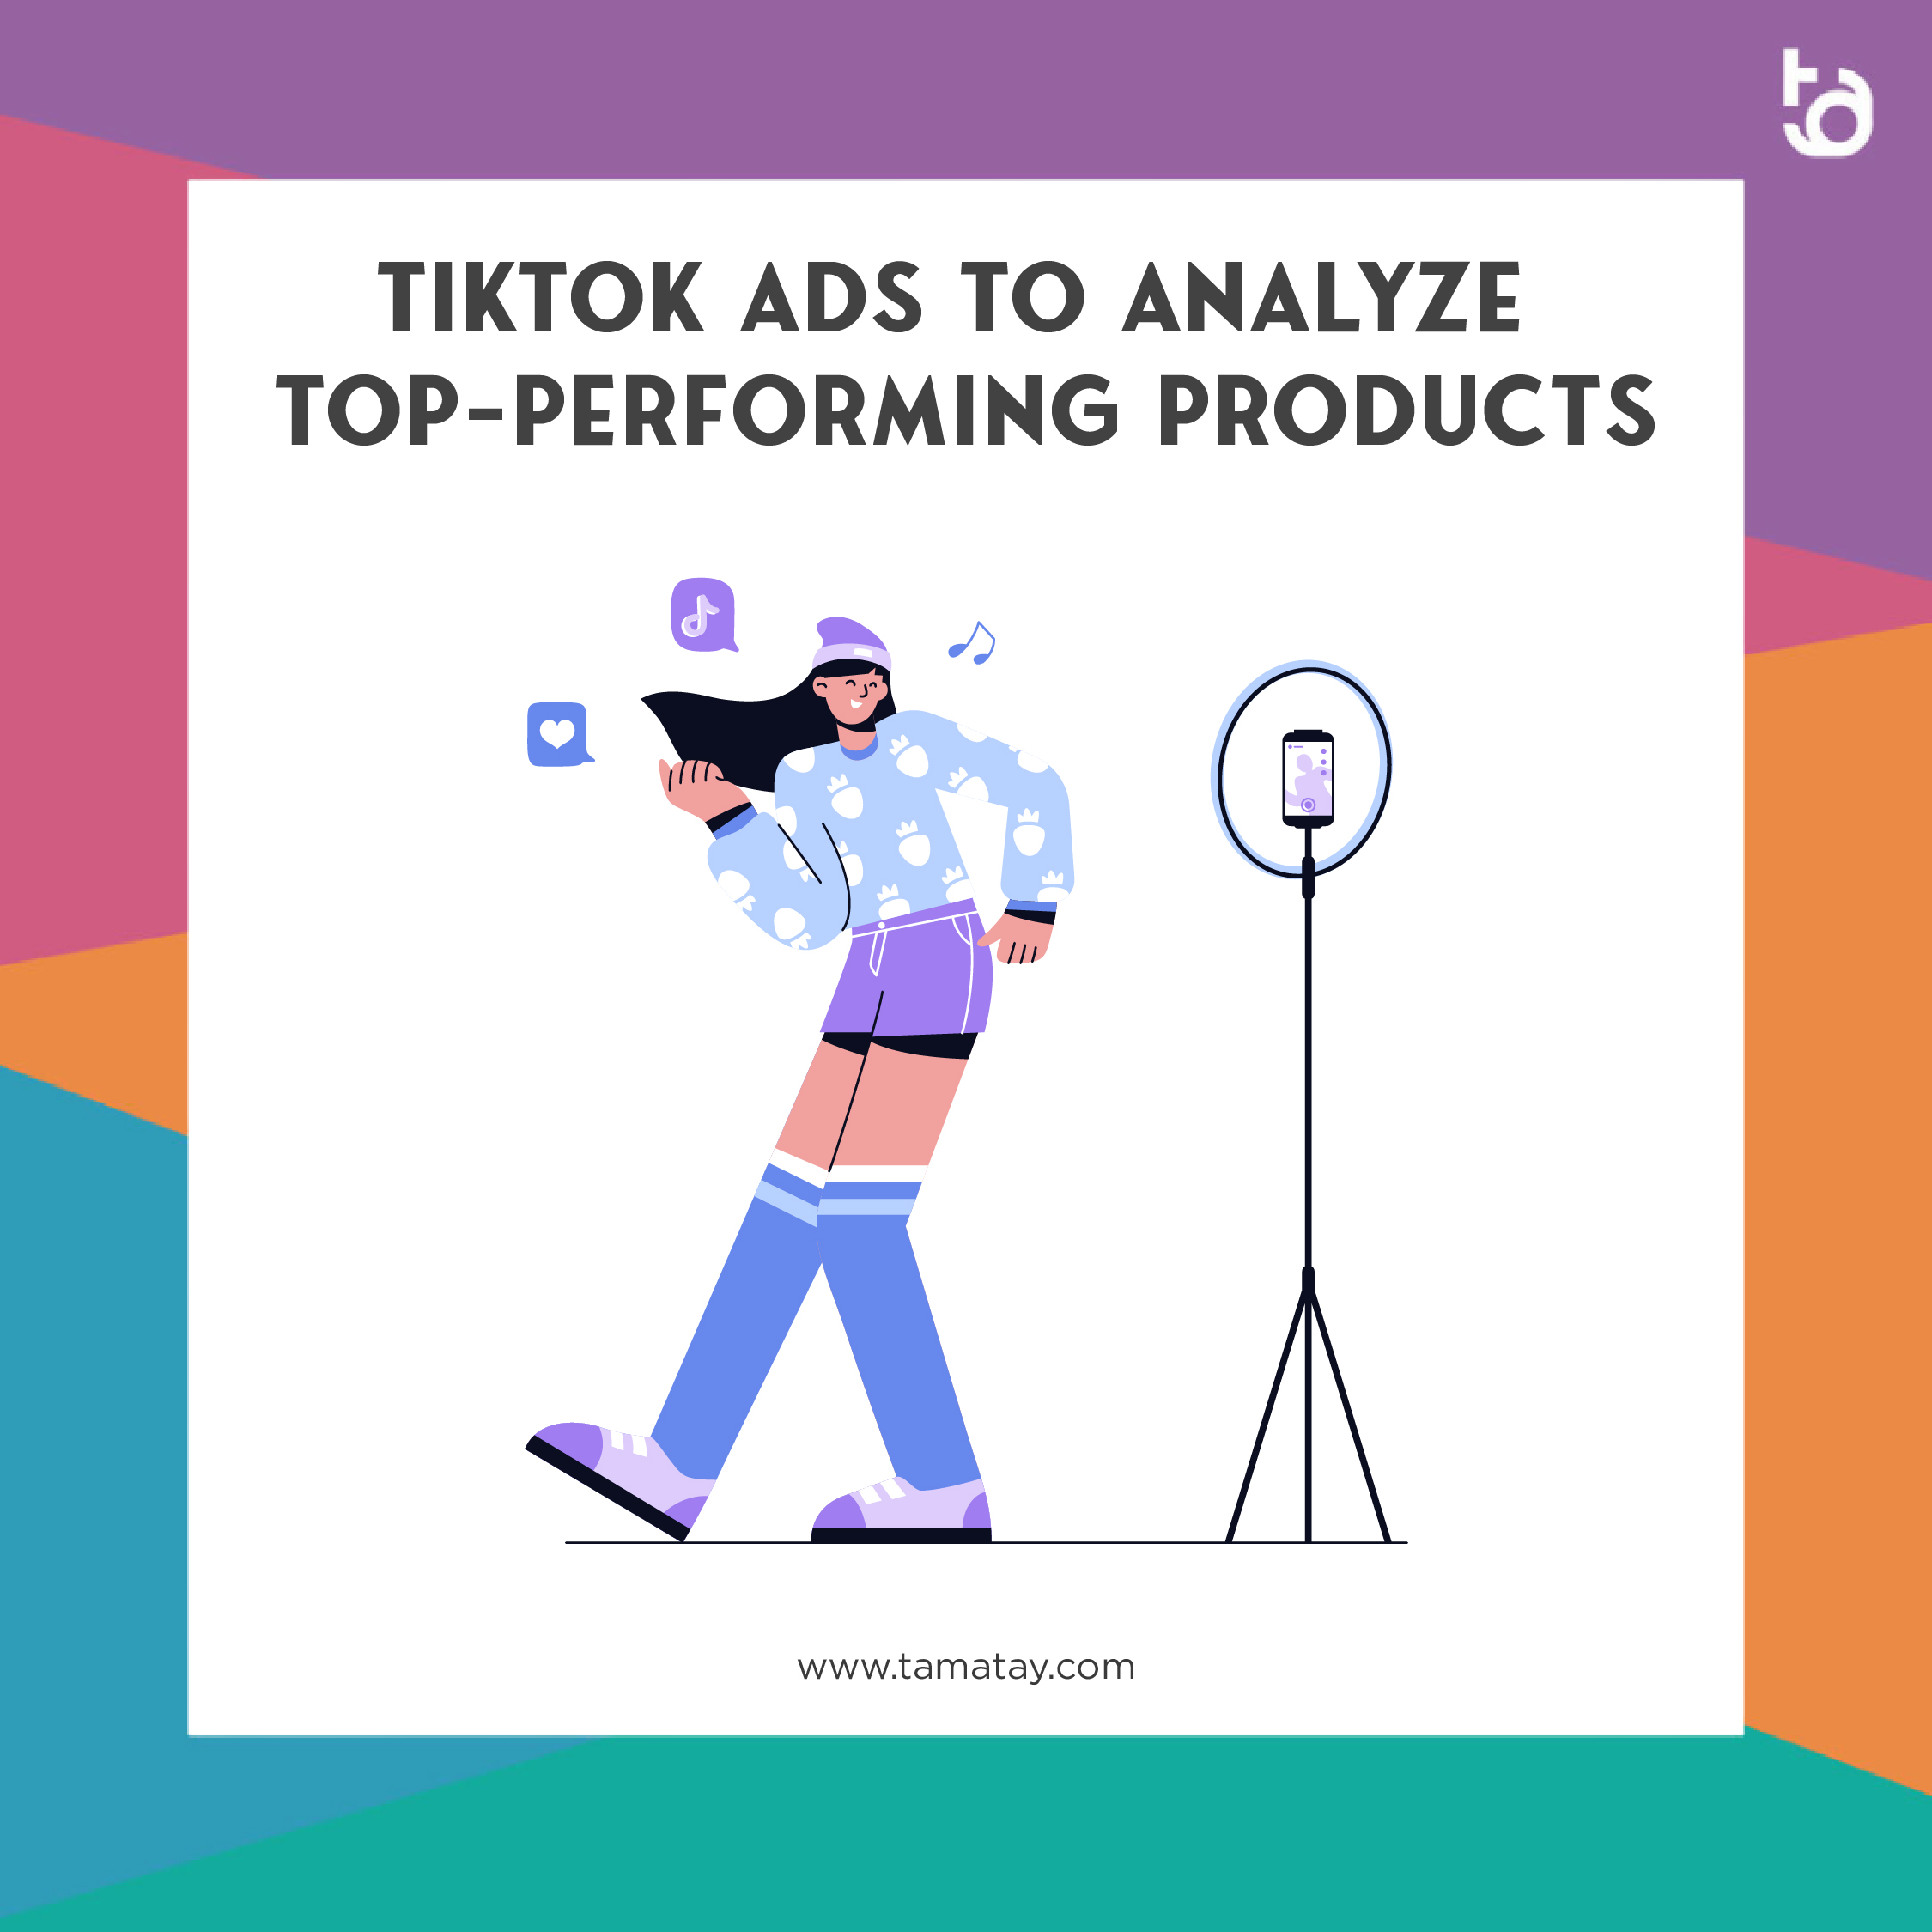 Using TikTok Ads to Analyze Top-Performing Products